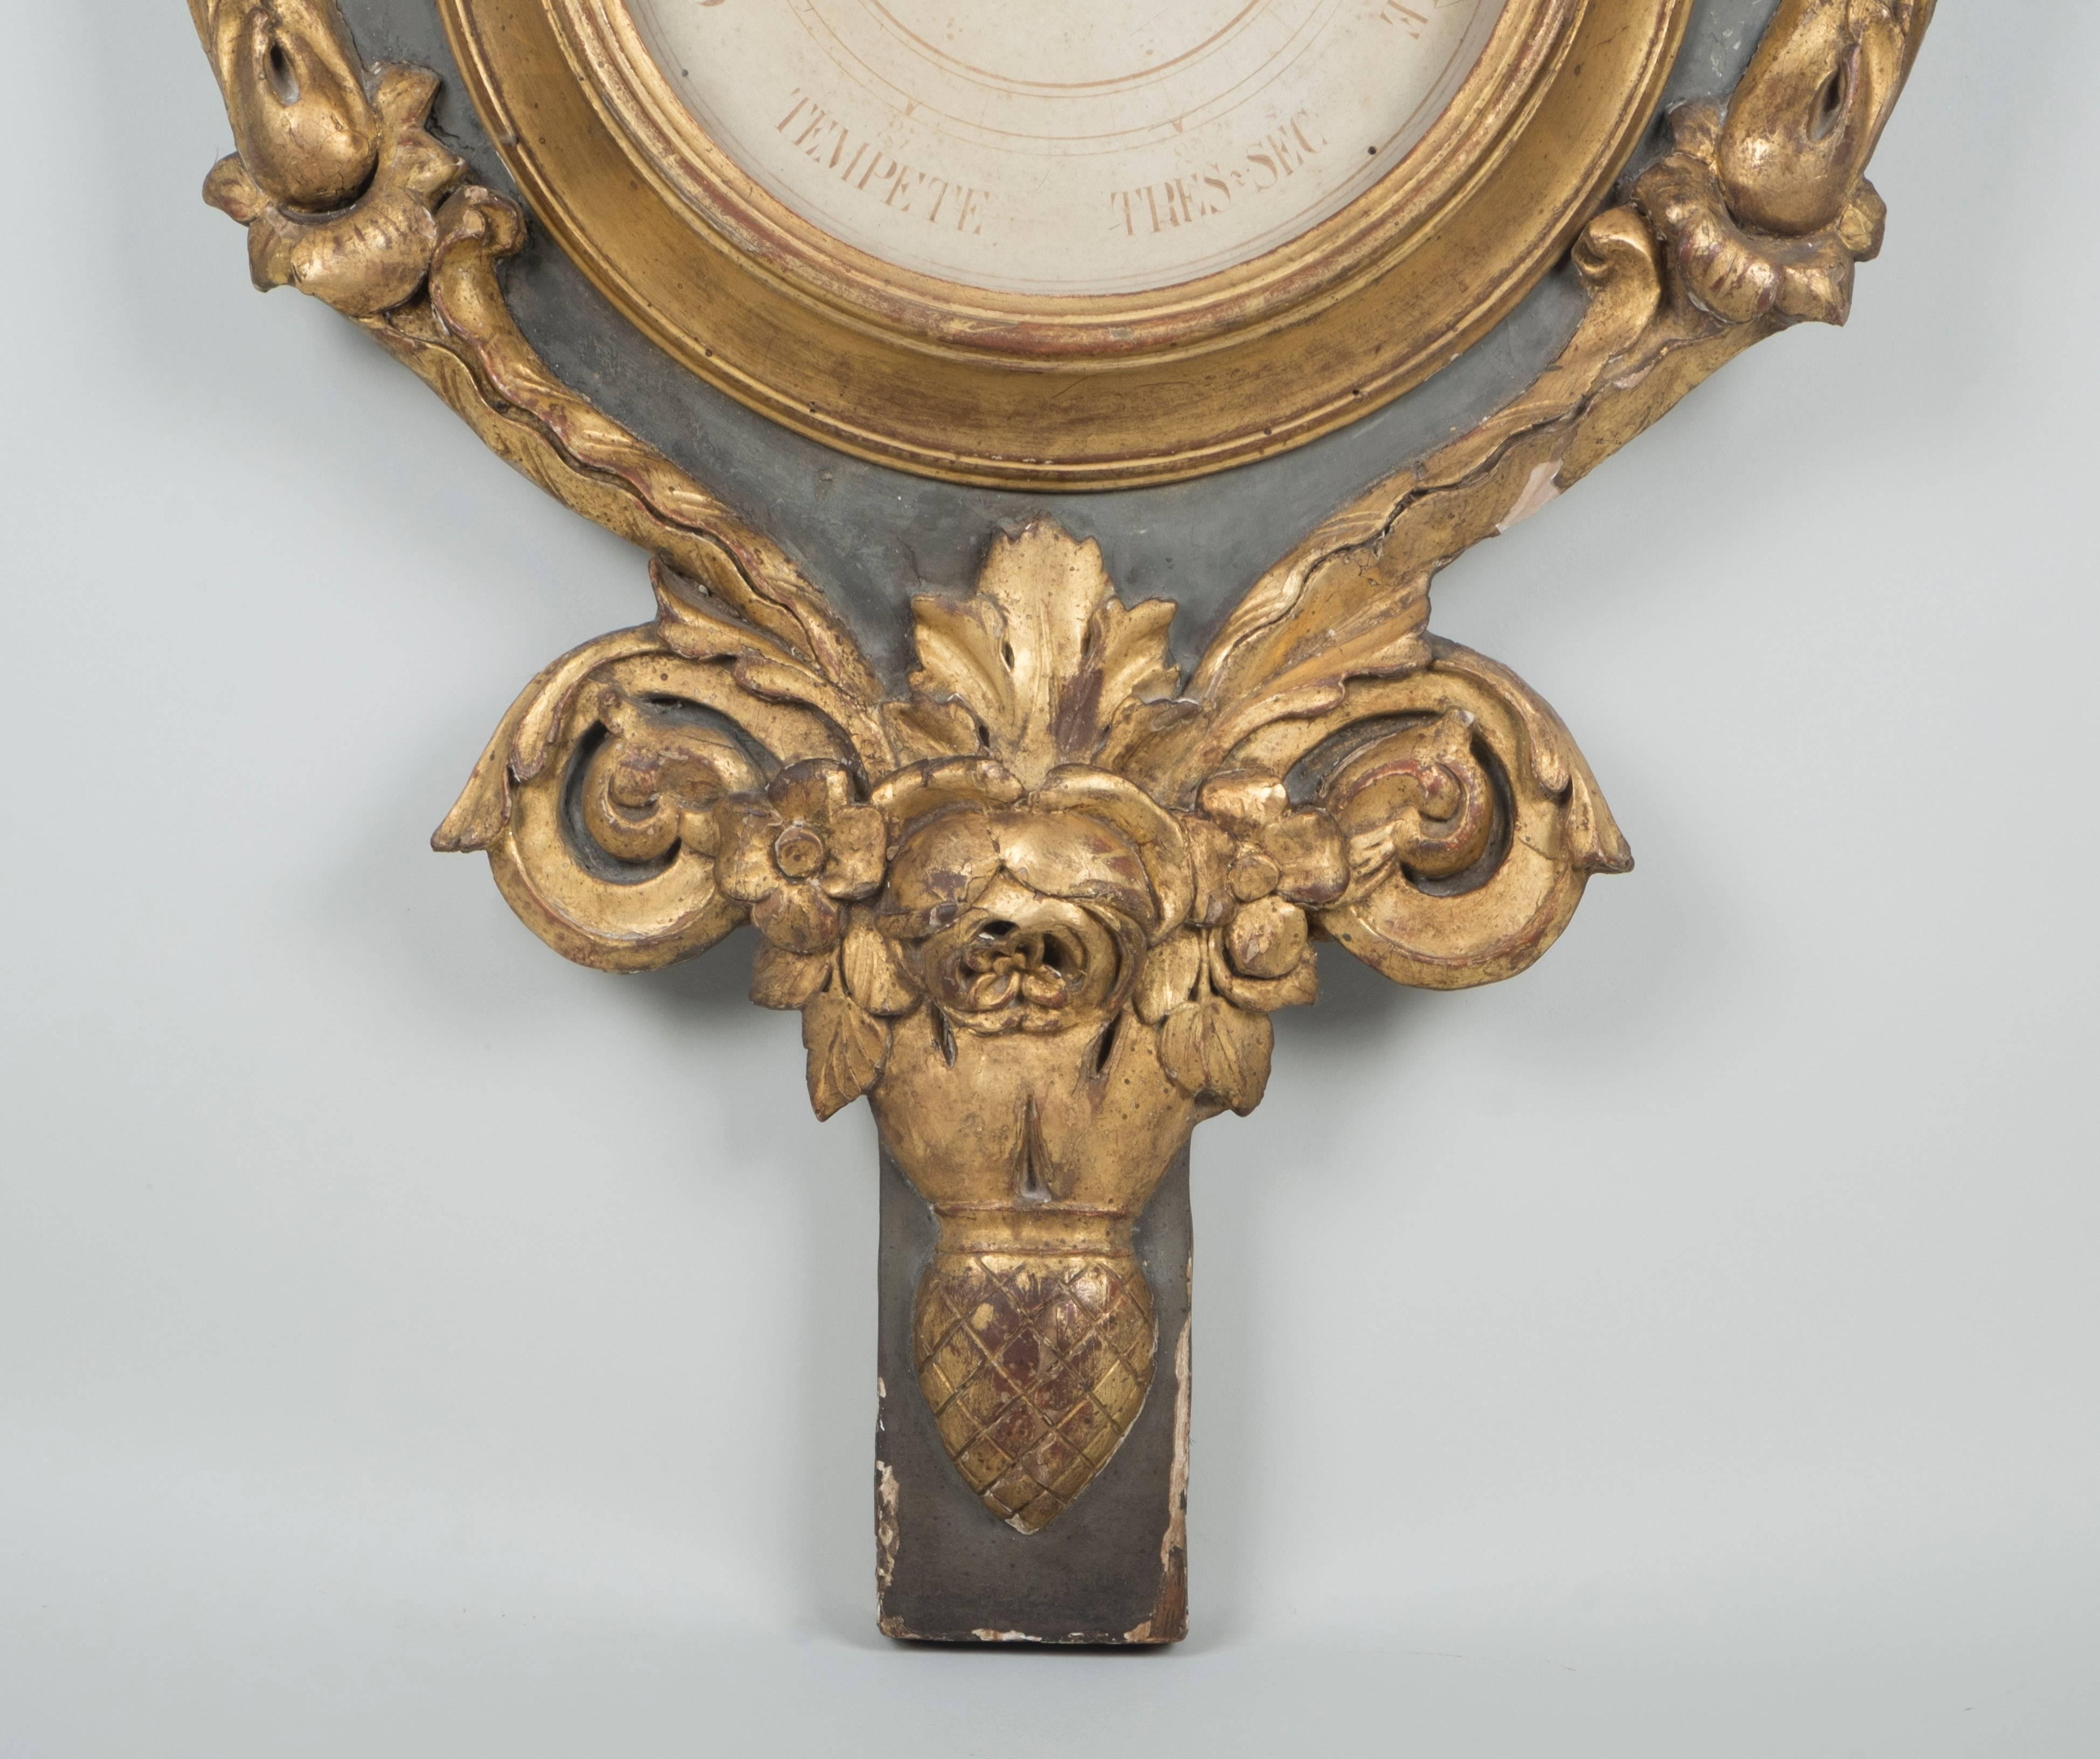 Pair of gilt and lacquered wood barometers and thermometers decorated with doves, horns of plenty, torches, arrows, laurels.

Work from the 18th century.

Dimensions:

123 cm H x 56 cm L.